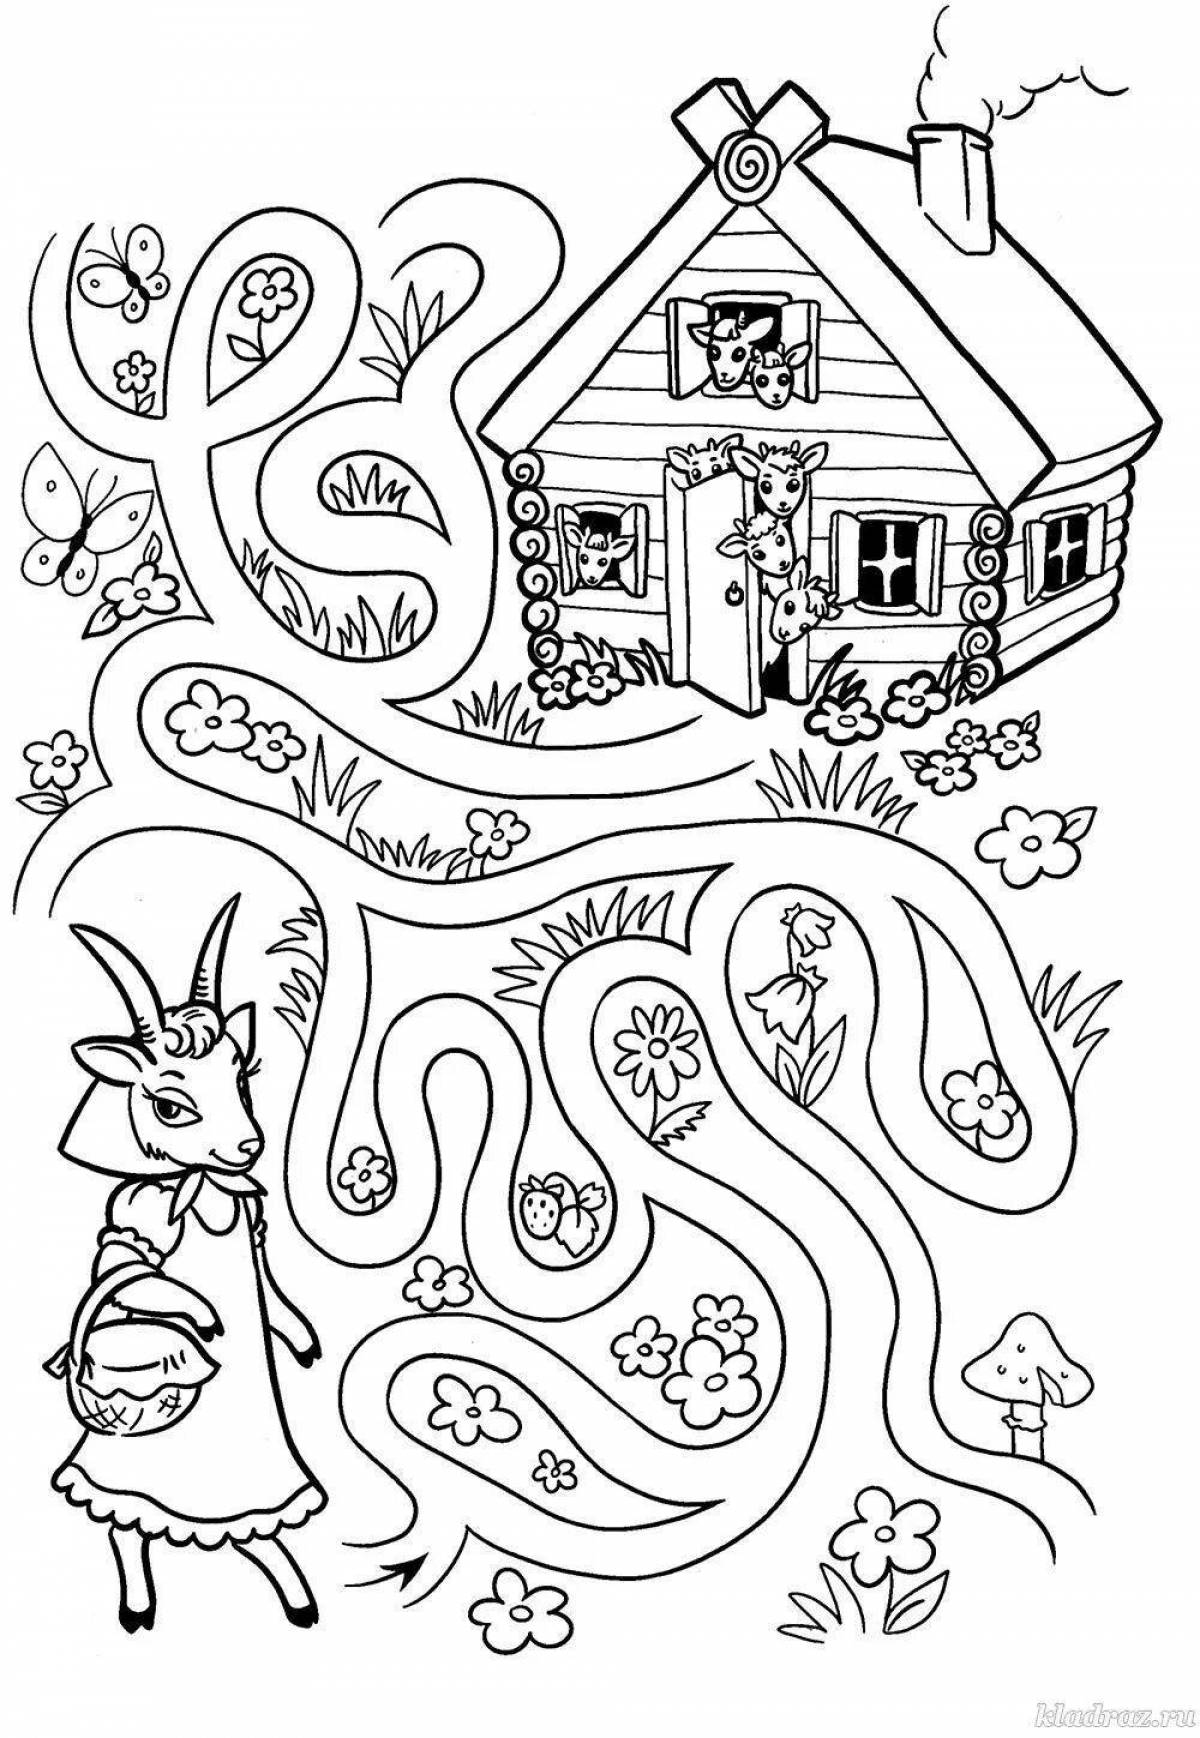 Creative coloring game for 6 year olds